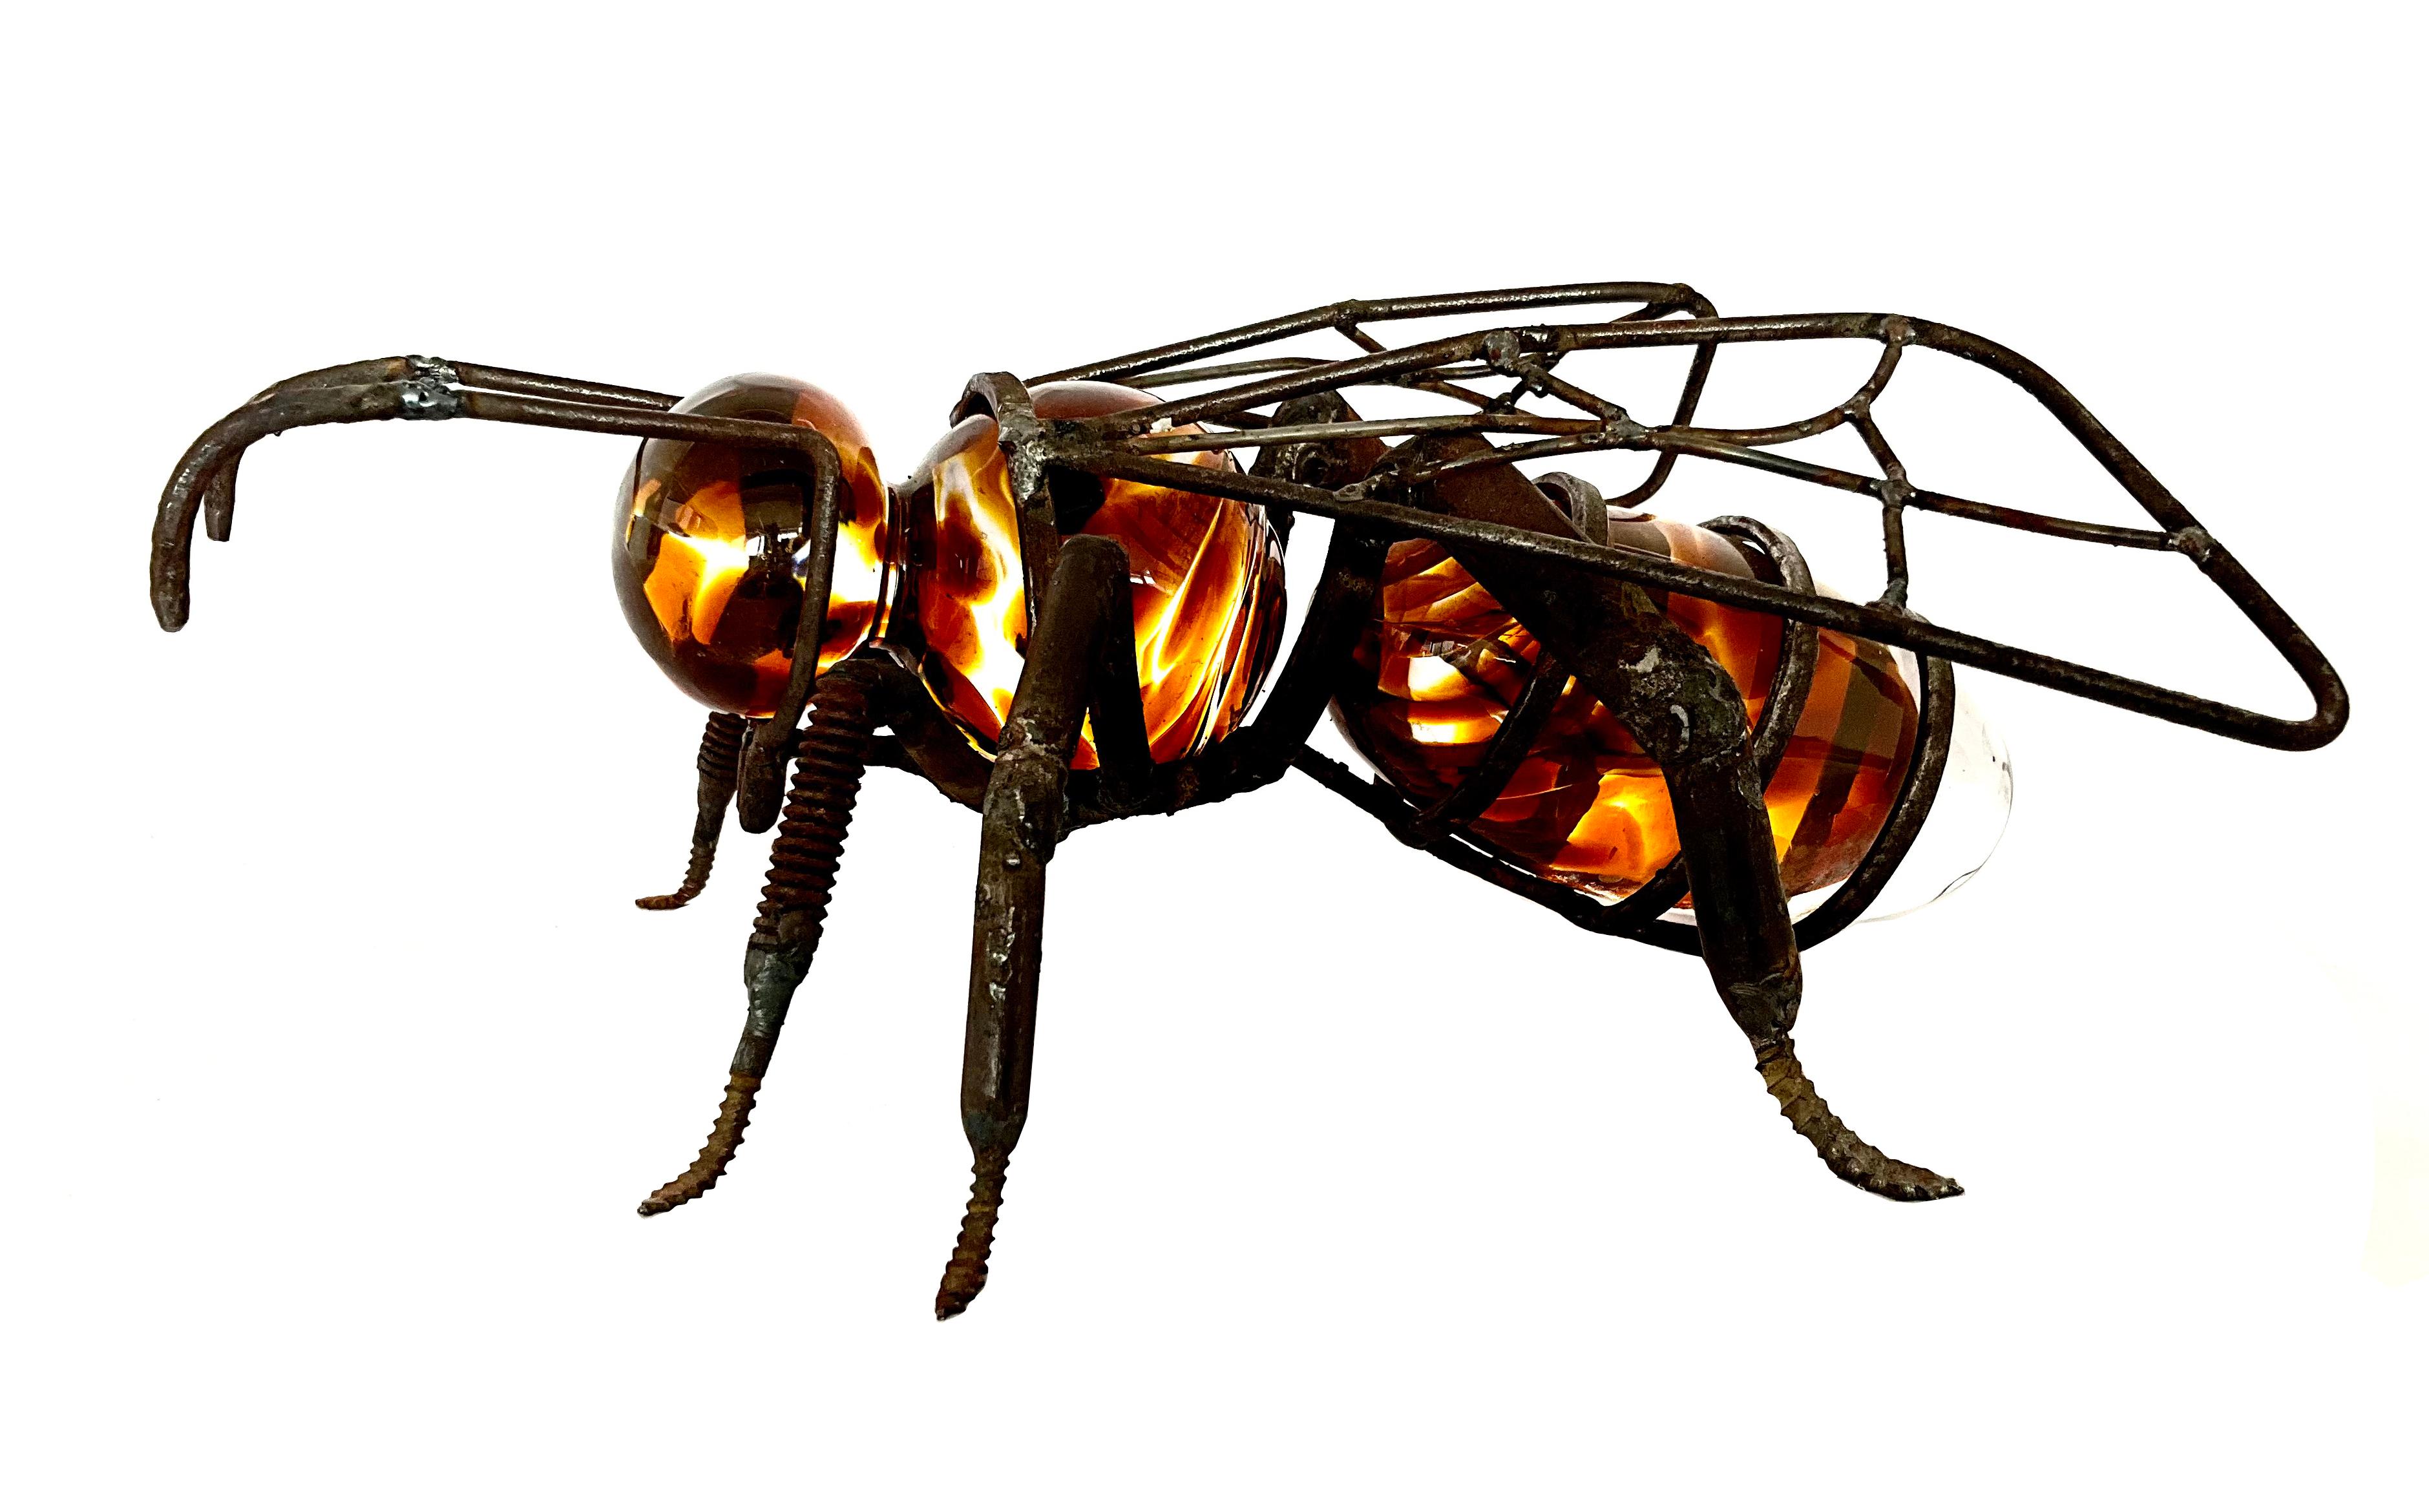 Hand-Blown Glass Bee, Recycled Steel and Crystal Parts - Sculpture by Marcos Romero Gallardo